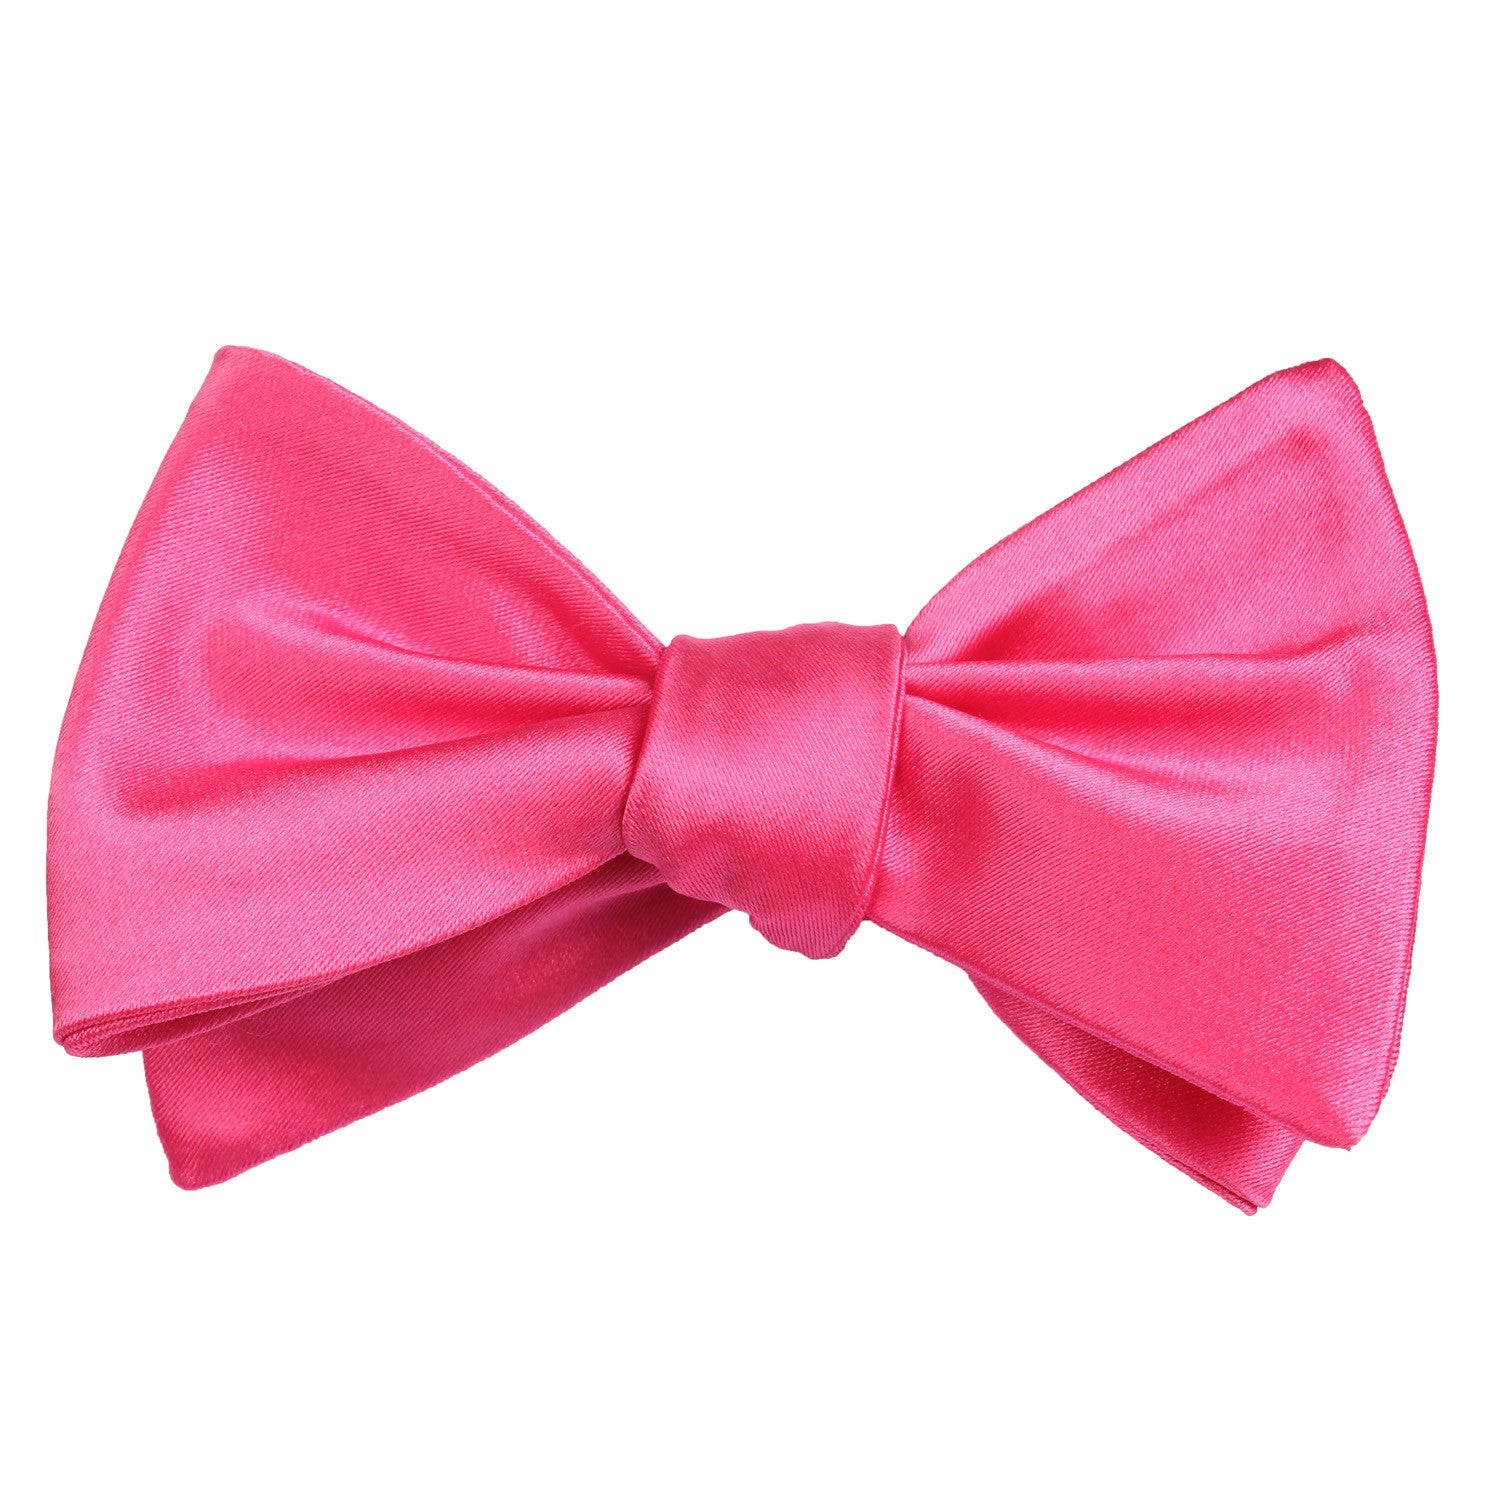 Hot Pink Bow Tie Untied Self tied knot by OTAA